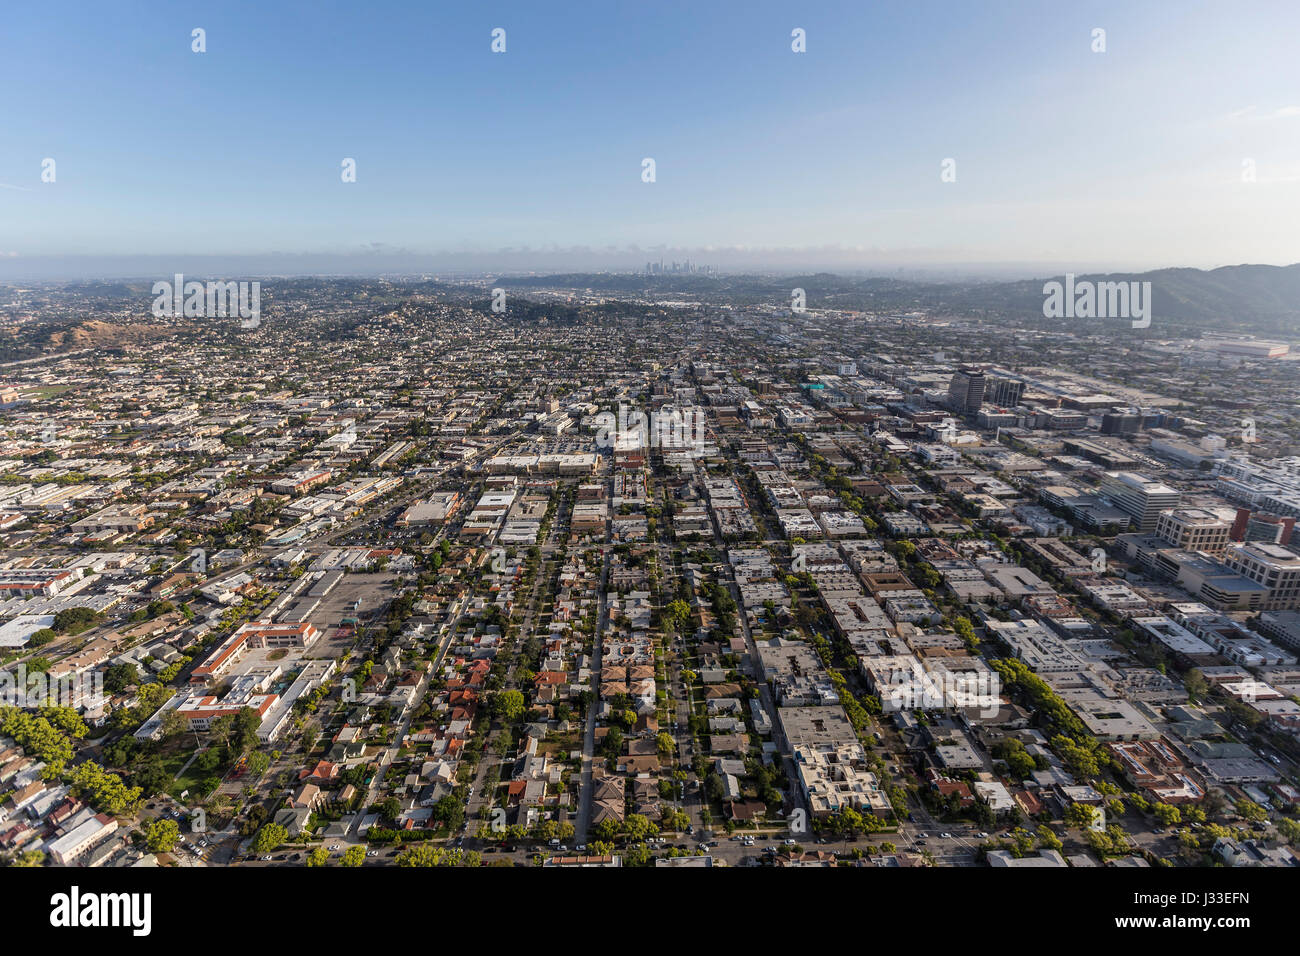 Aerial view of Glendale with Los Angeles California in background. Stock Photo